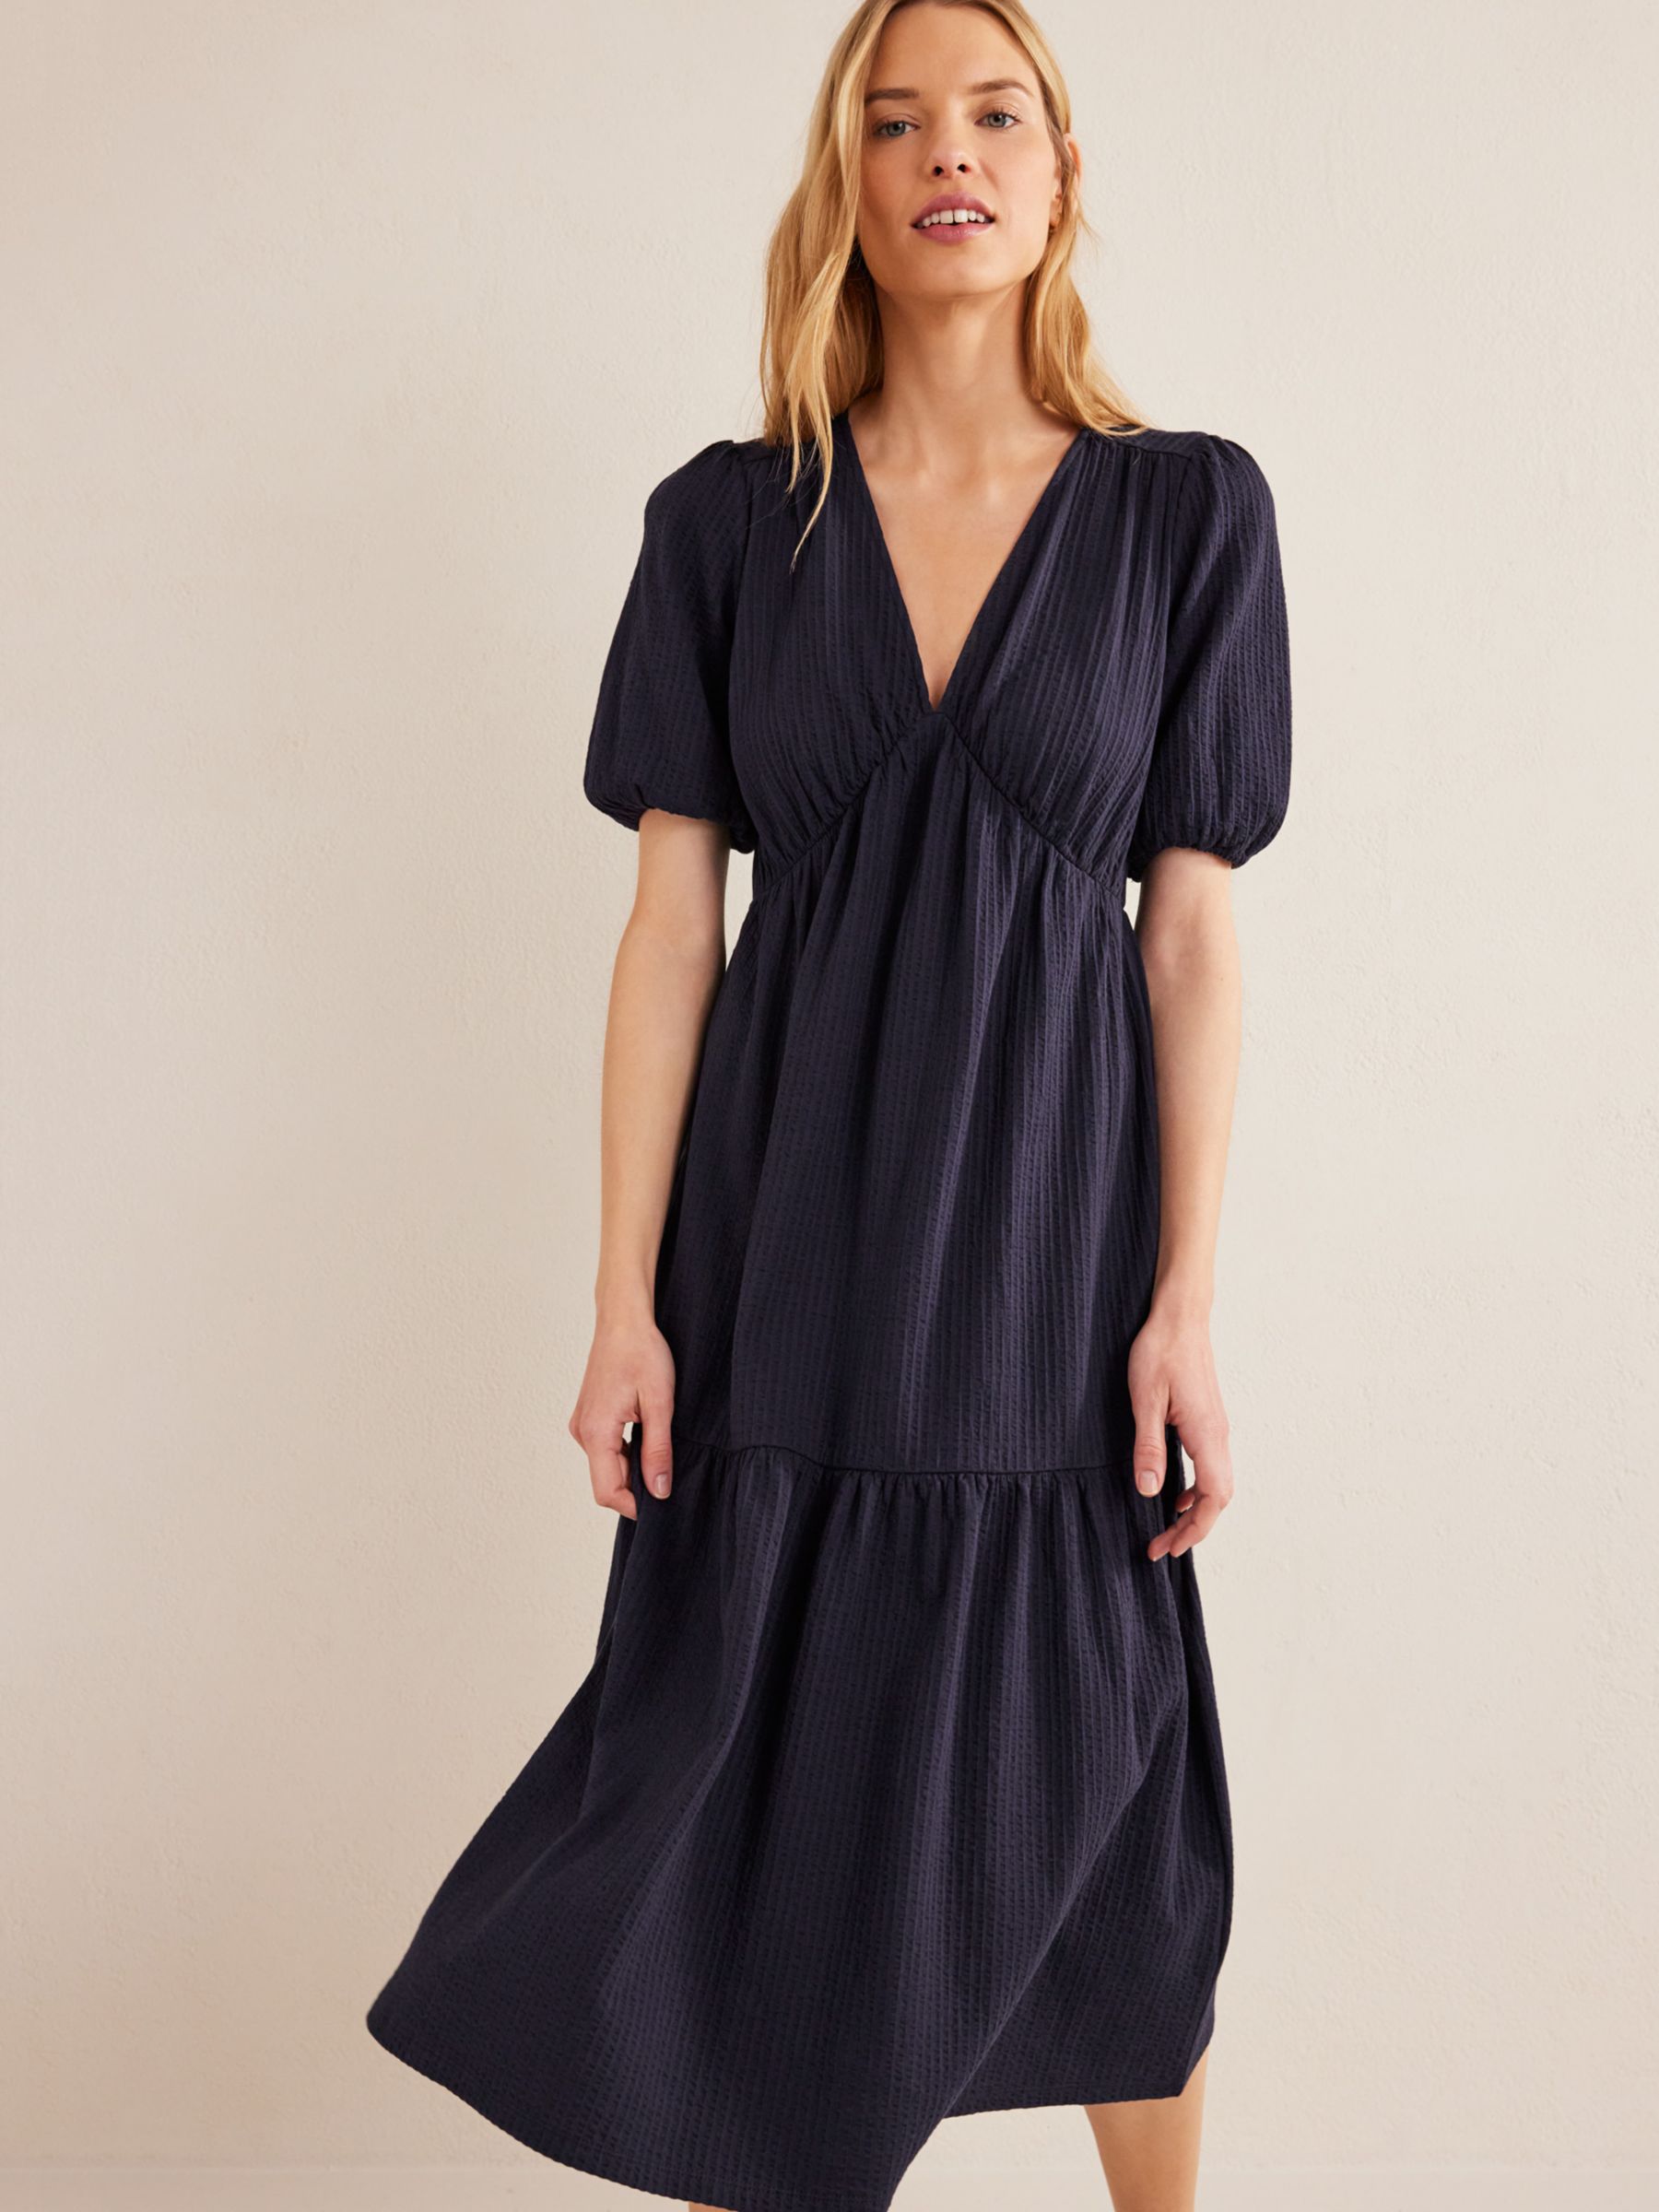 Boden Tiered Crinkle Midi Dress, Navy